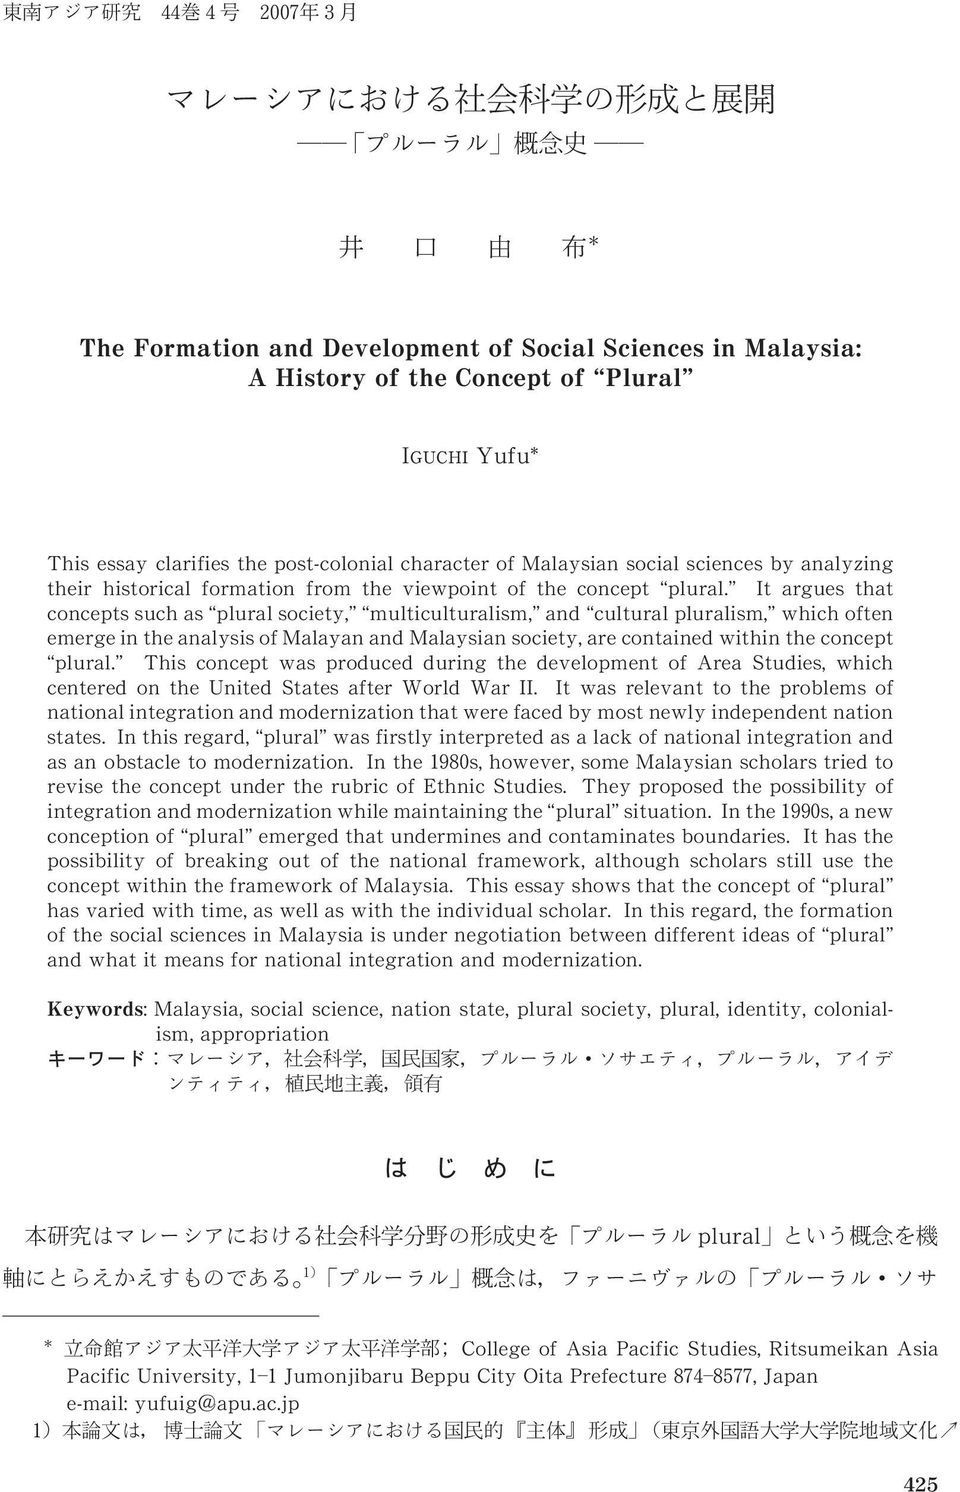 It argues that concepts such as plural society, multiculturalism, and cultural pluralism, which often emerge in the analysis of Malayan and Malaysian society, are contained within the concept plural.